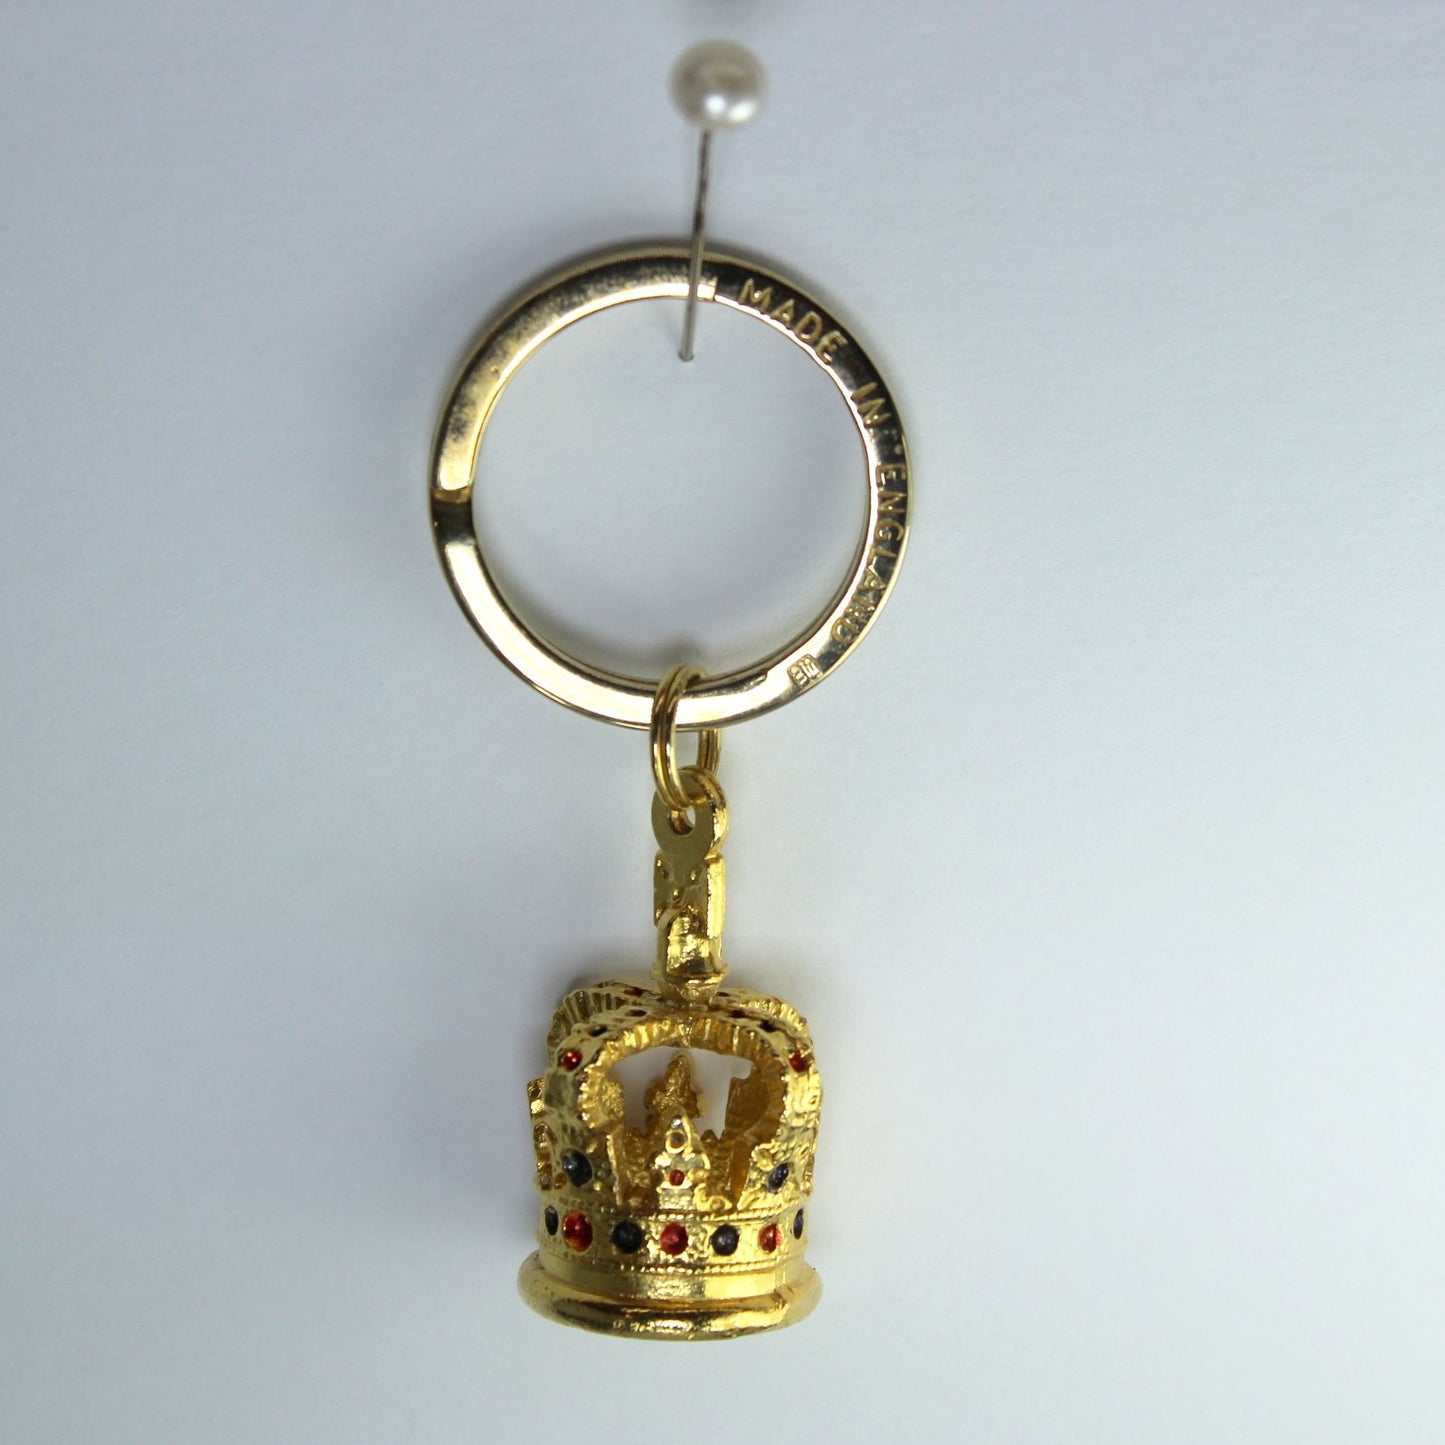 Queen's Royal Crown Keychain Key Ring  Made England Heavy Vintage Unused  maker marked